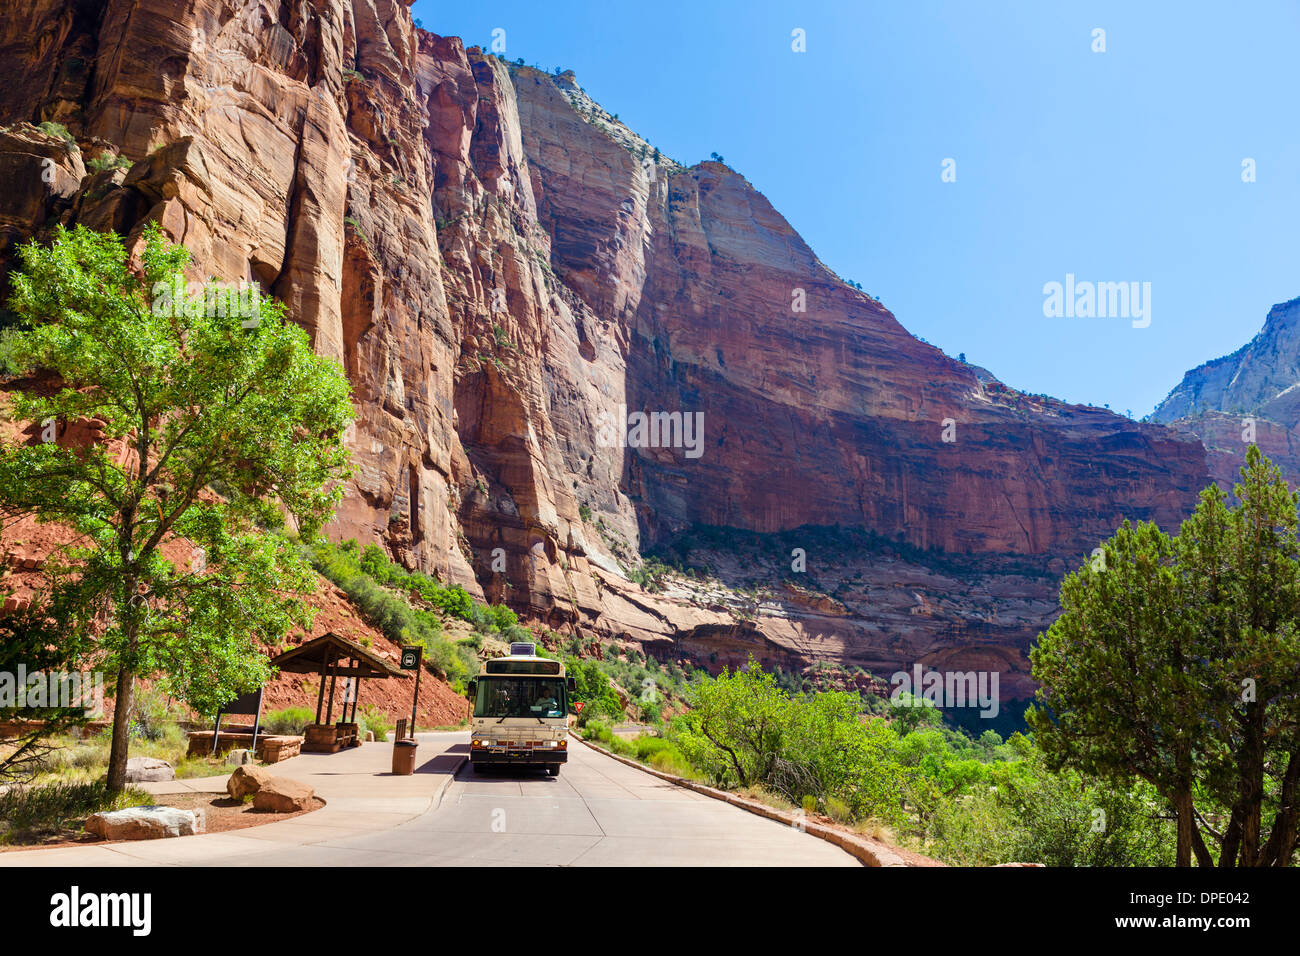 Shuttle bus at Big Bend stop, Zion Canyon, Zion National Park, Utah, USA Stock Photo